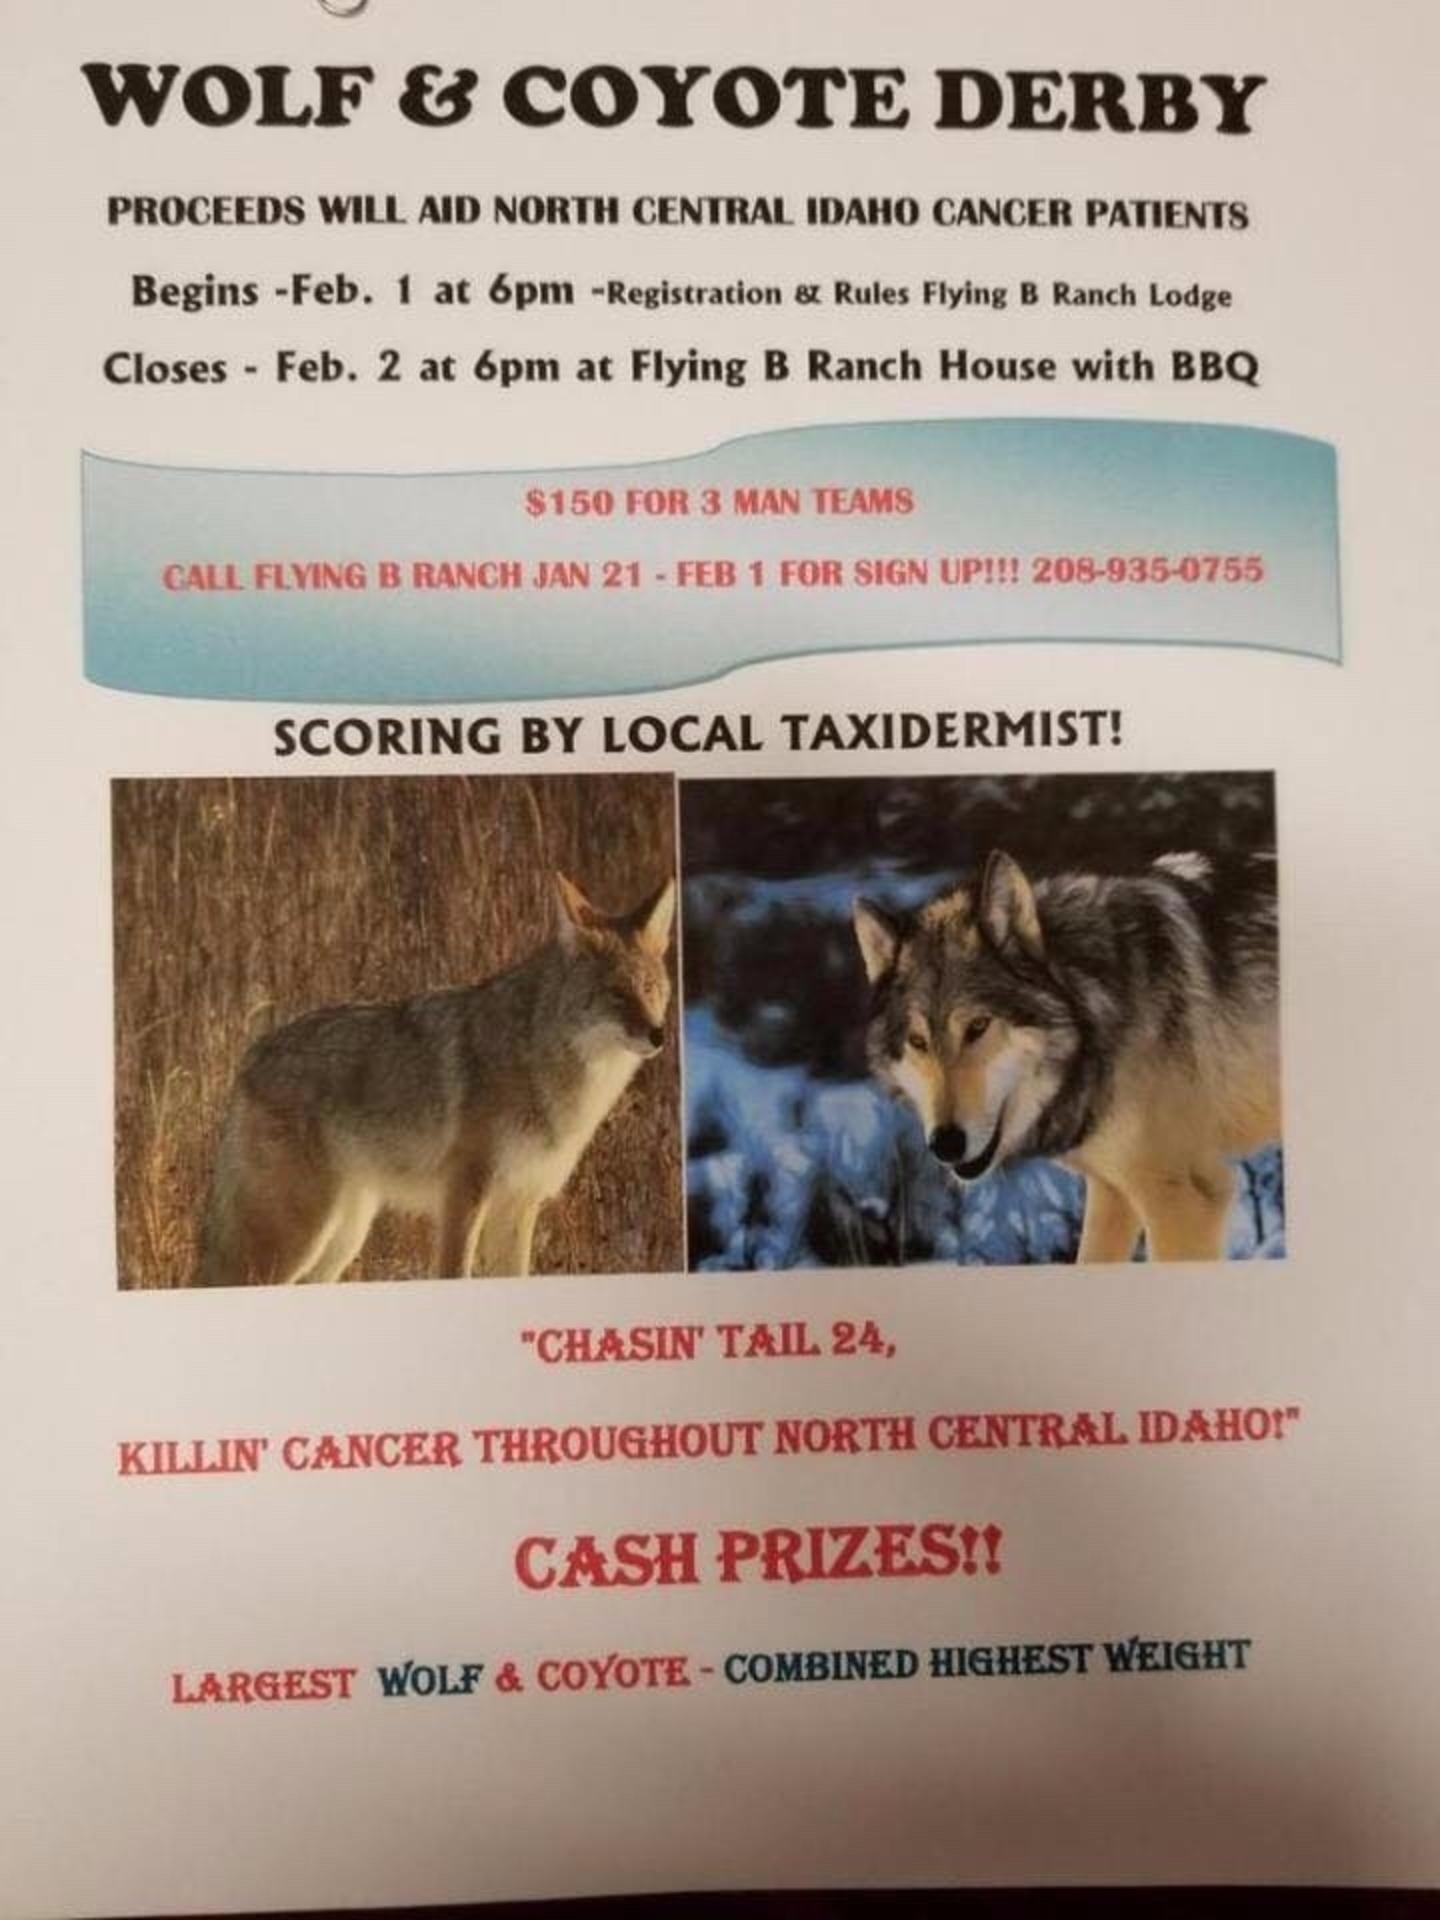 Flier for an upcoming predator-killing derby in Salmon, Idaho that is being touted as a fundraiser for cancer victims.